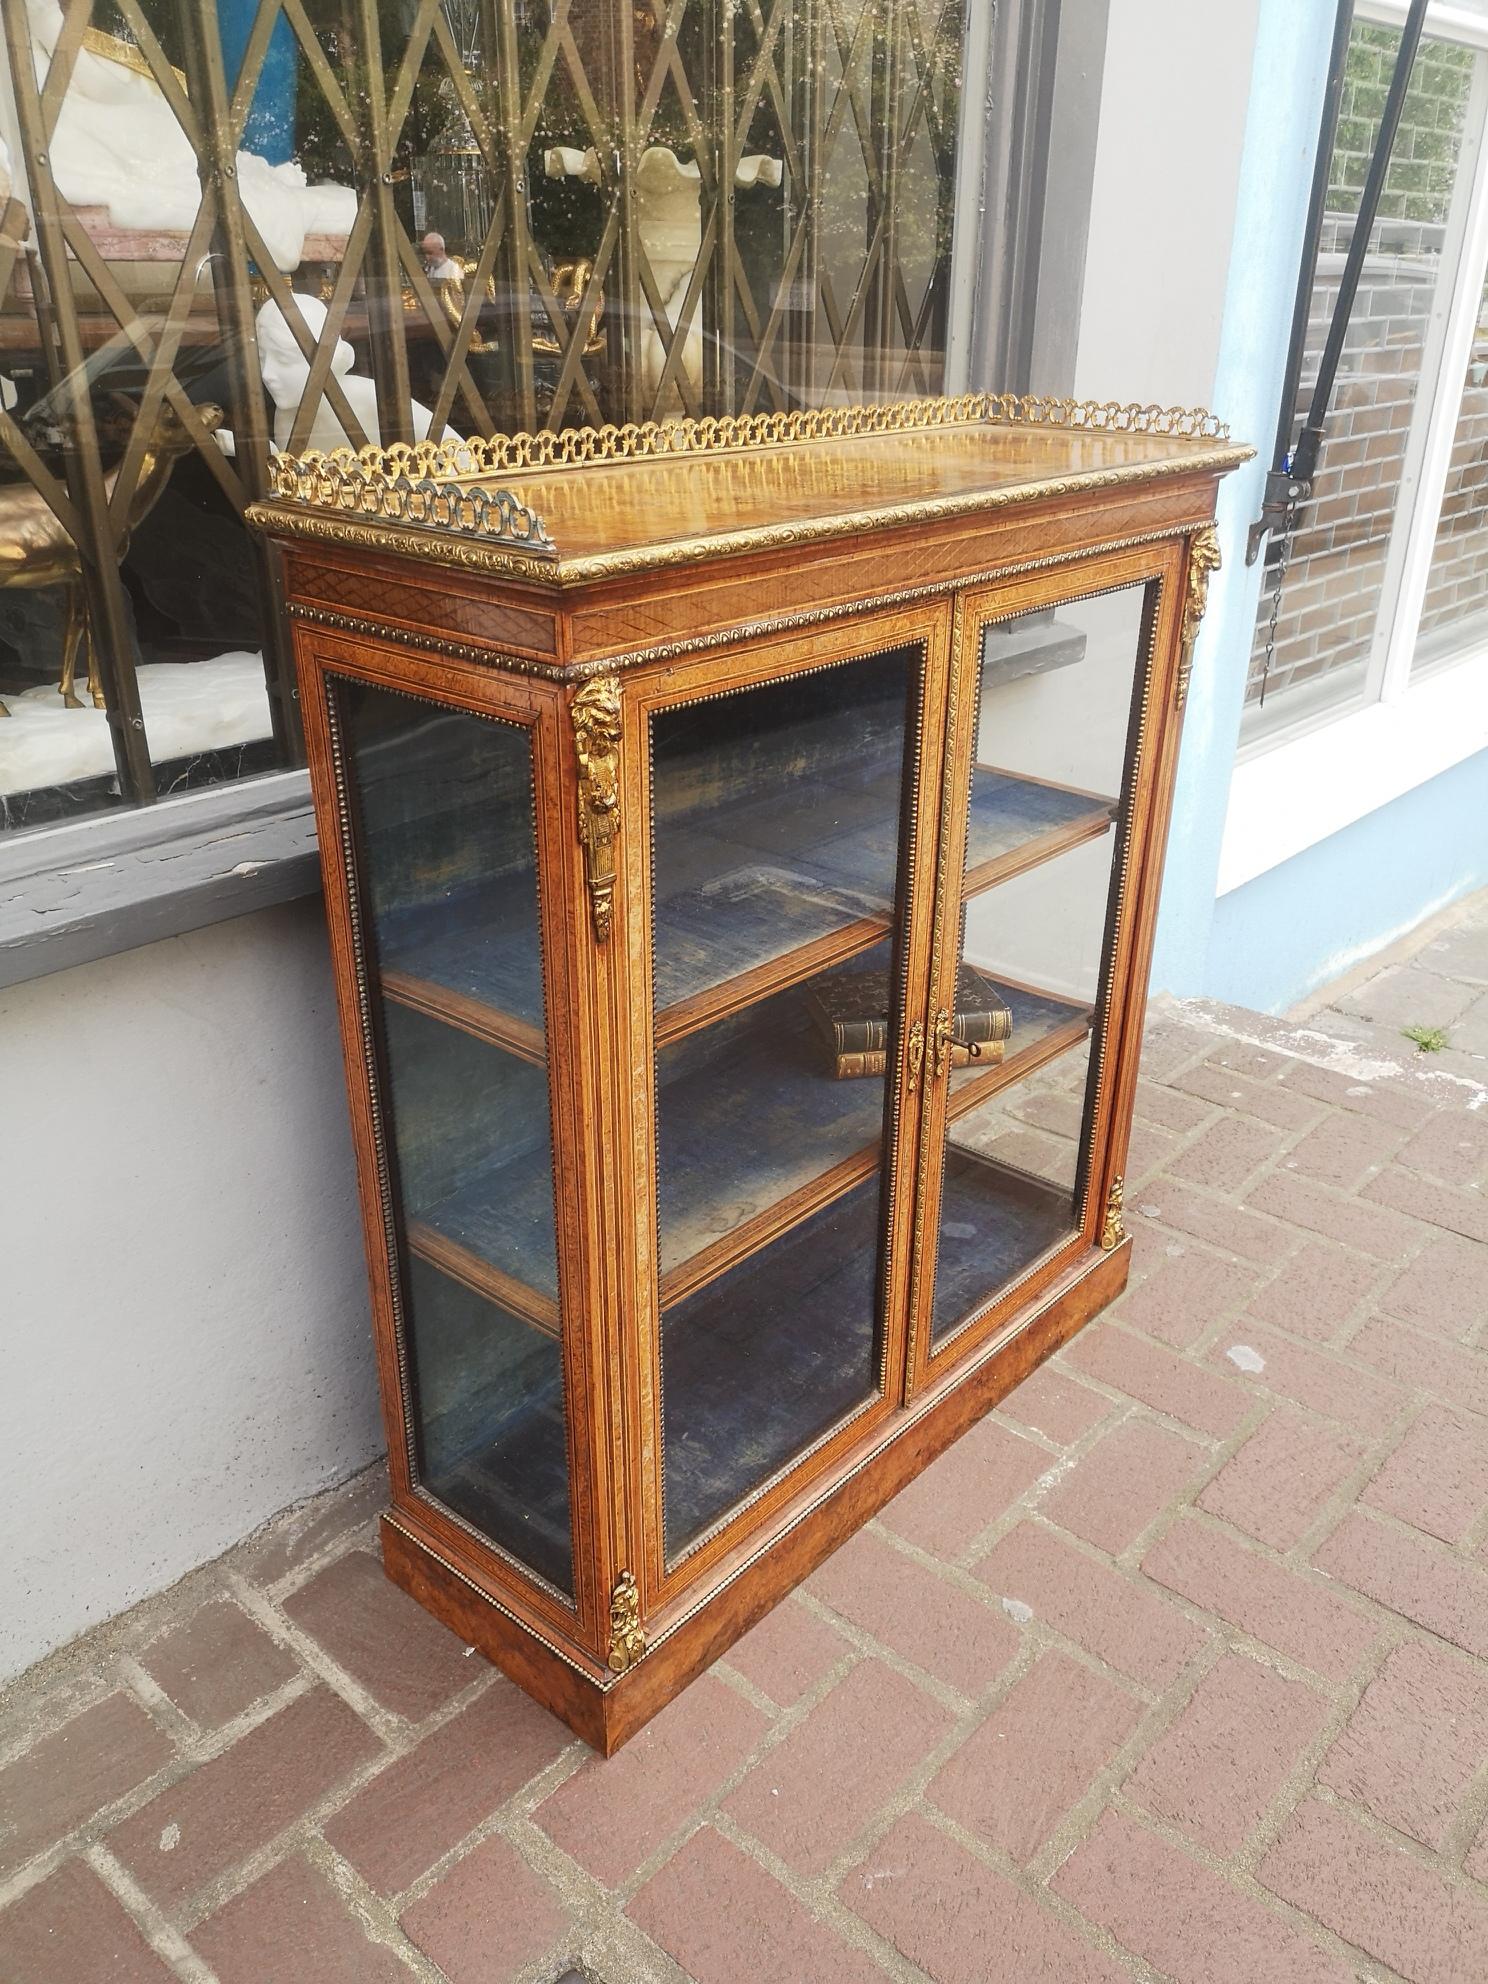 A good quality 19th century English walnut bookcase. With a bronze mounts and gallery top, inlaid with Amboyna and other exotic woods, glazed doors and sides with the original blue velvet interior.
English, circa 1860.